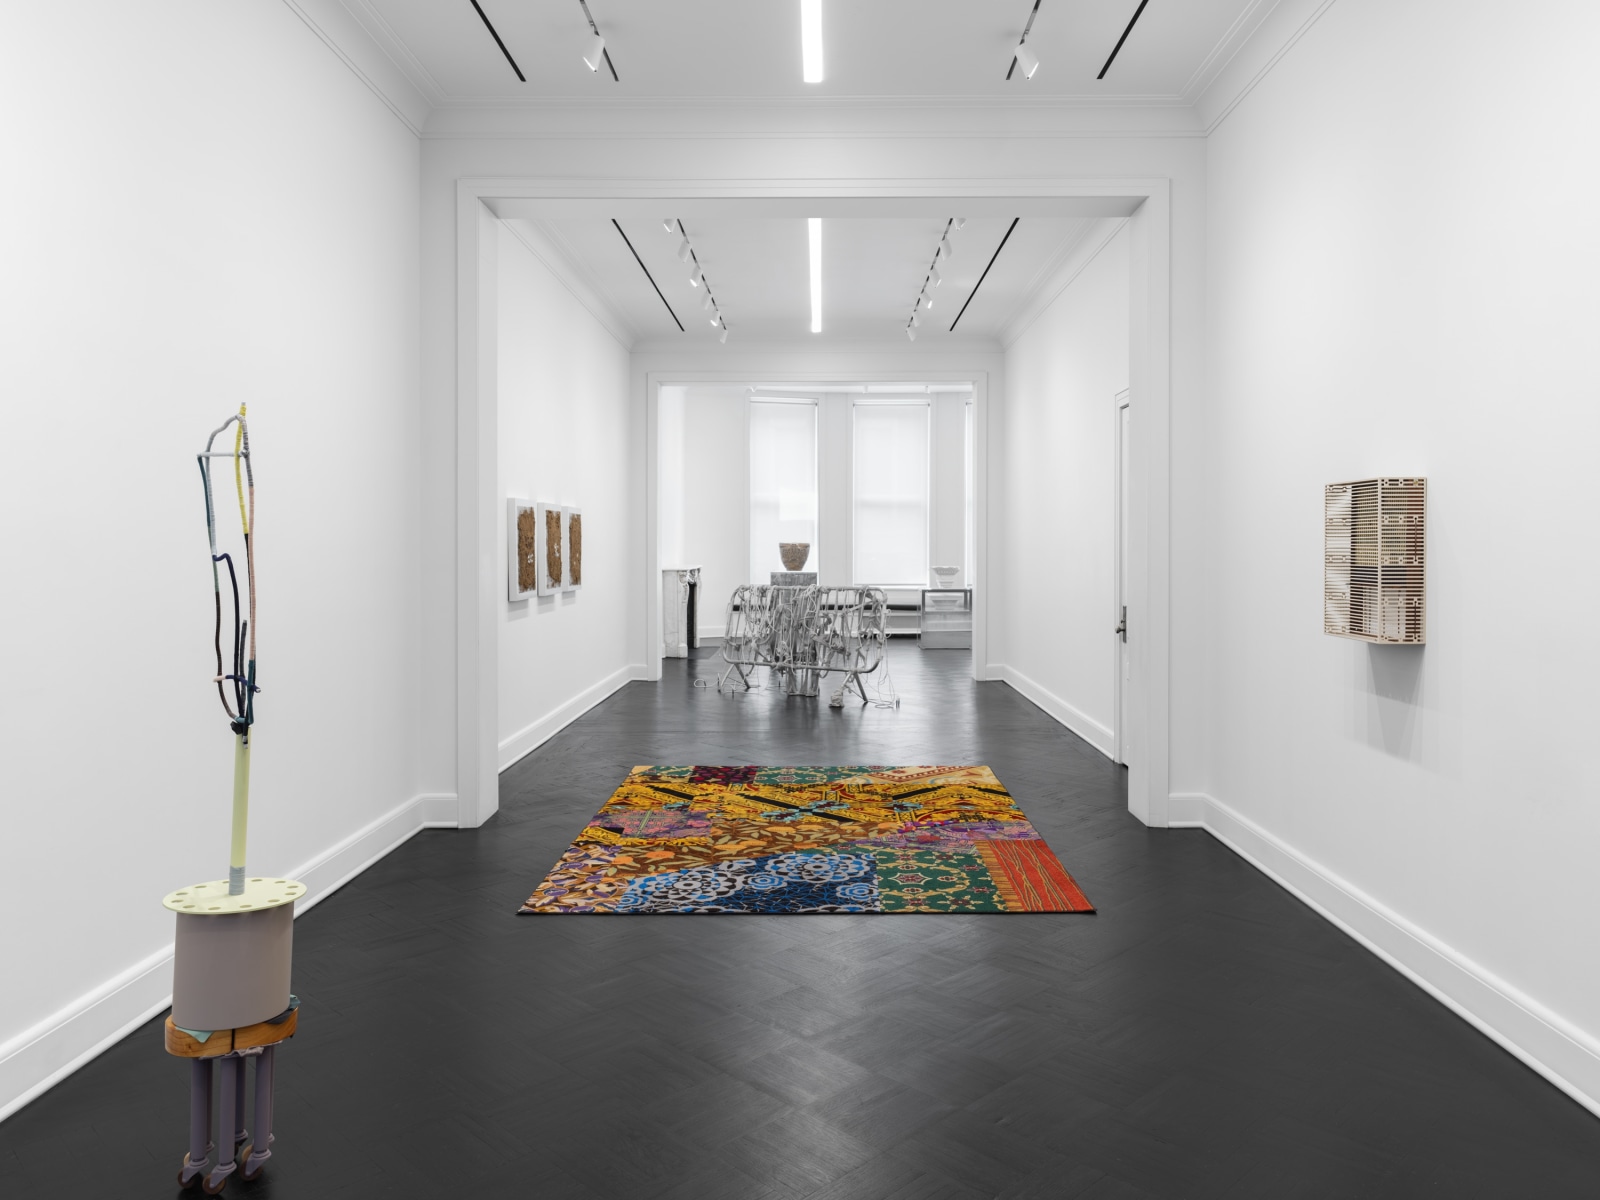 Installation view, Commonwealth and Council, Petzel, 2022